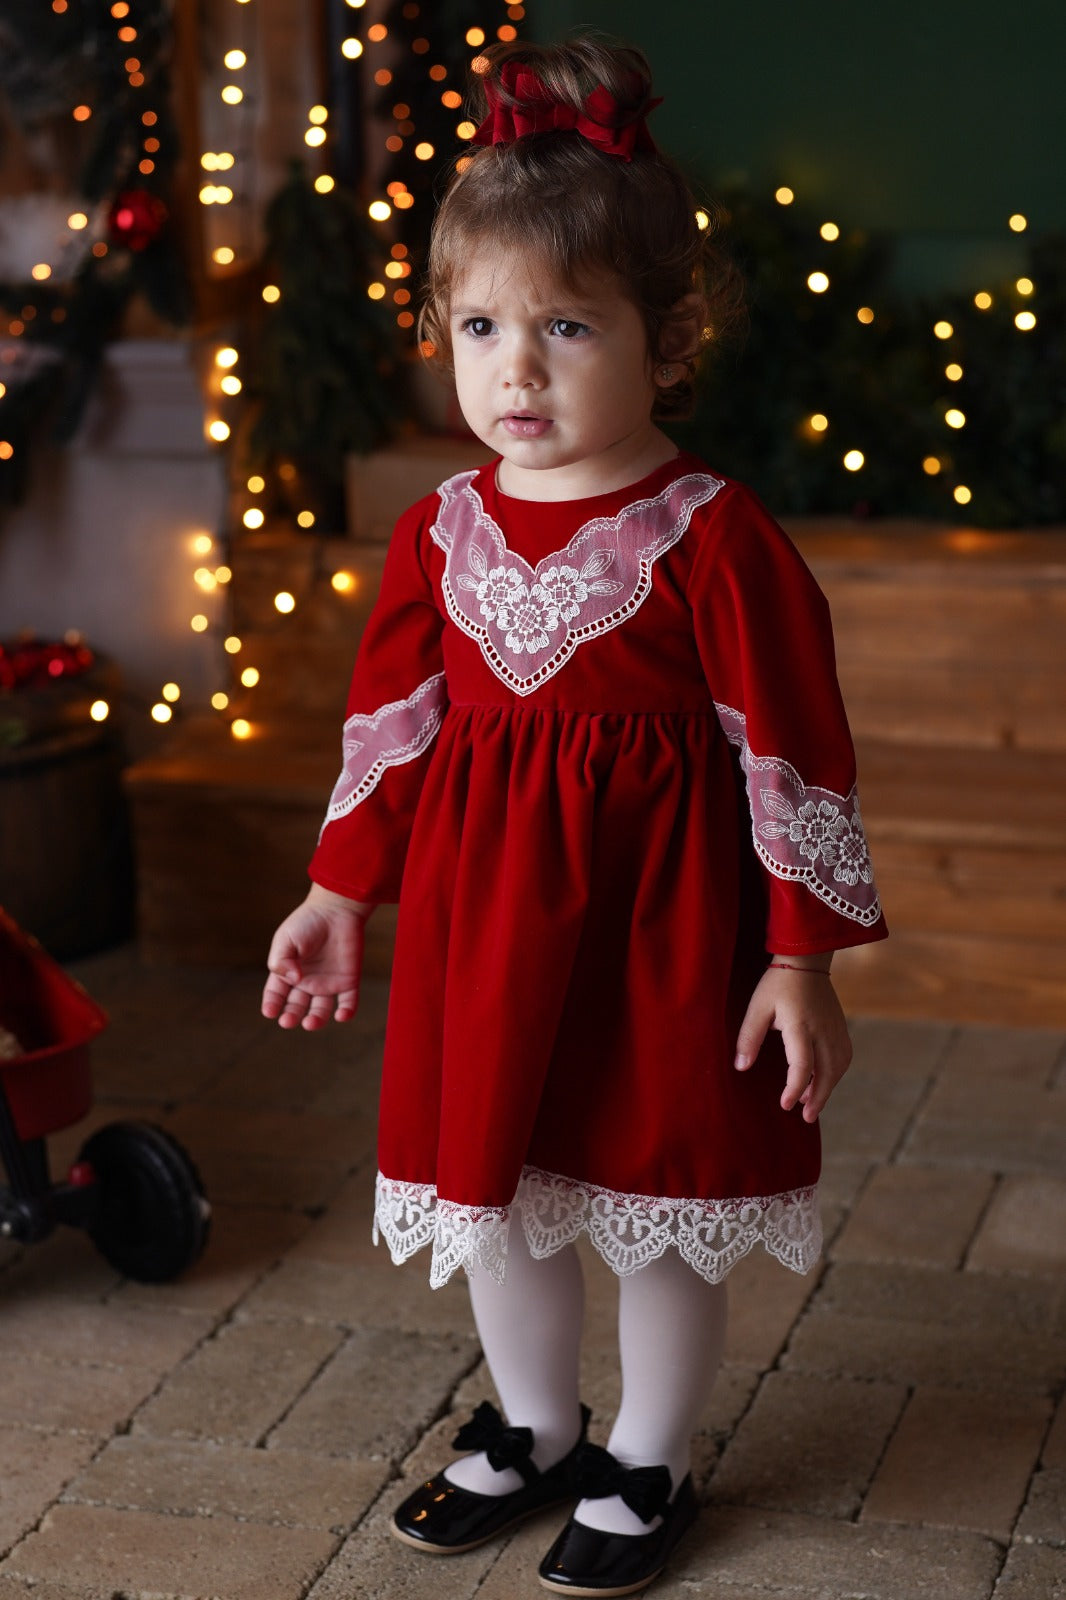 a little girl in a red dress and black shoes